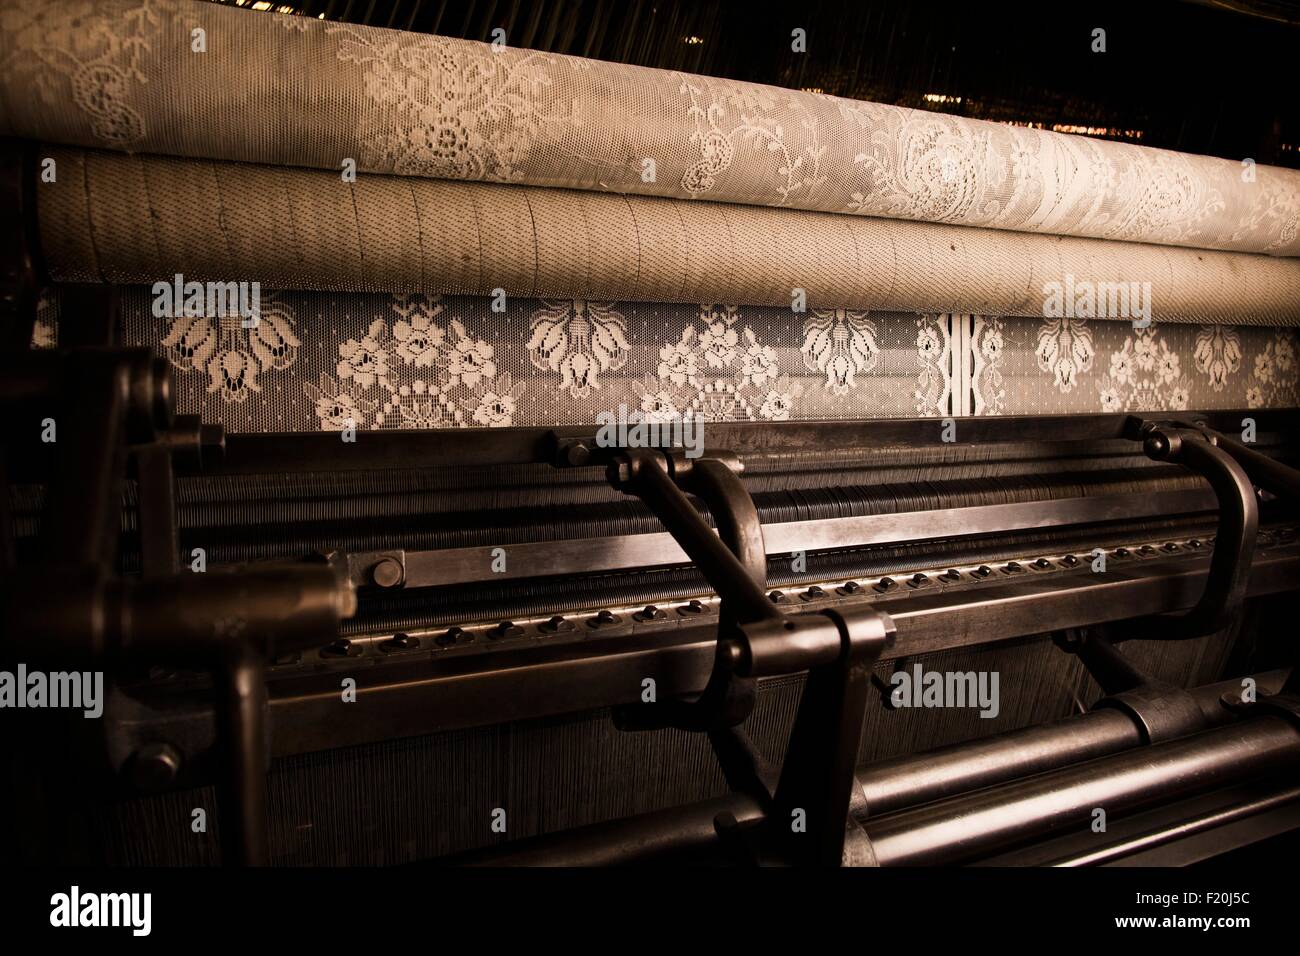 Intricate lace on old weaving machine in textile mill Stock Photo